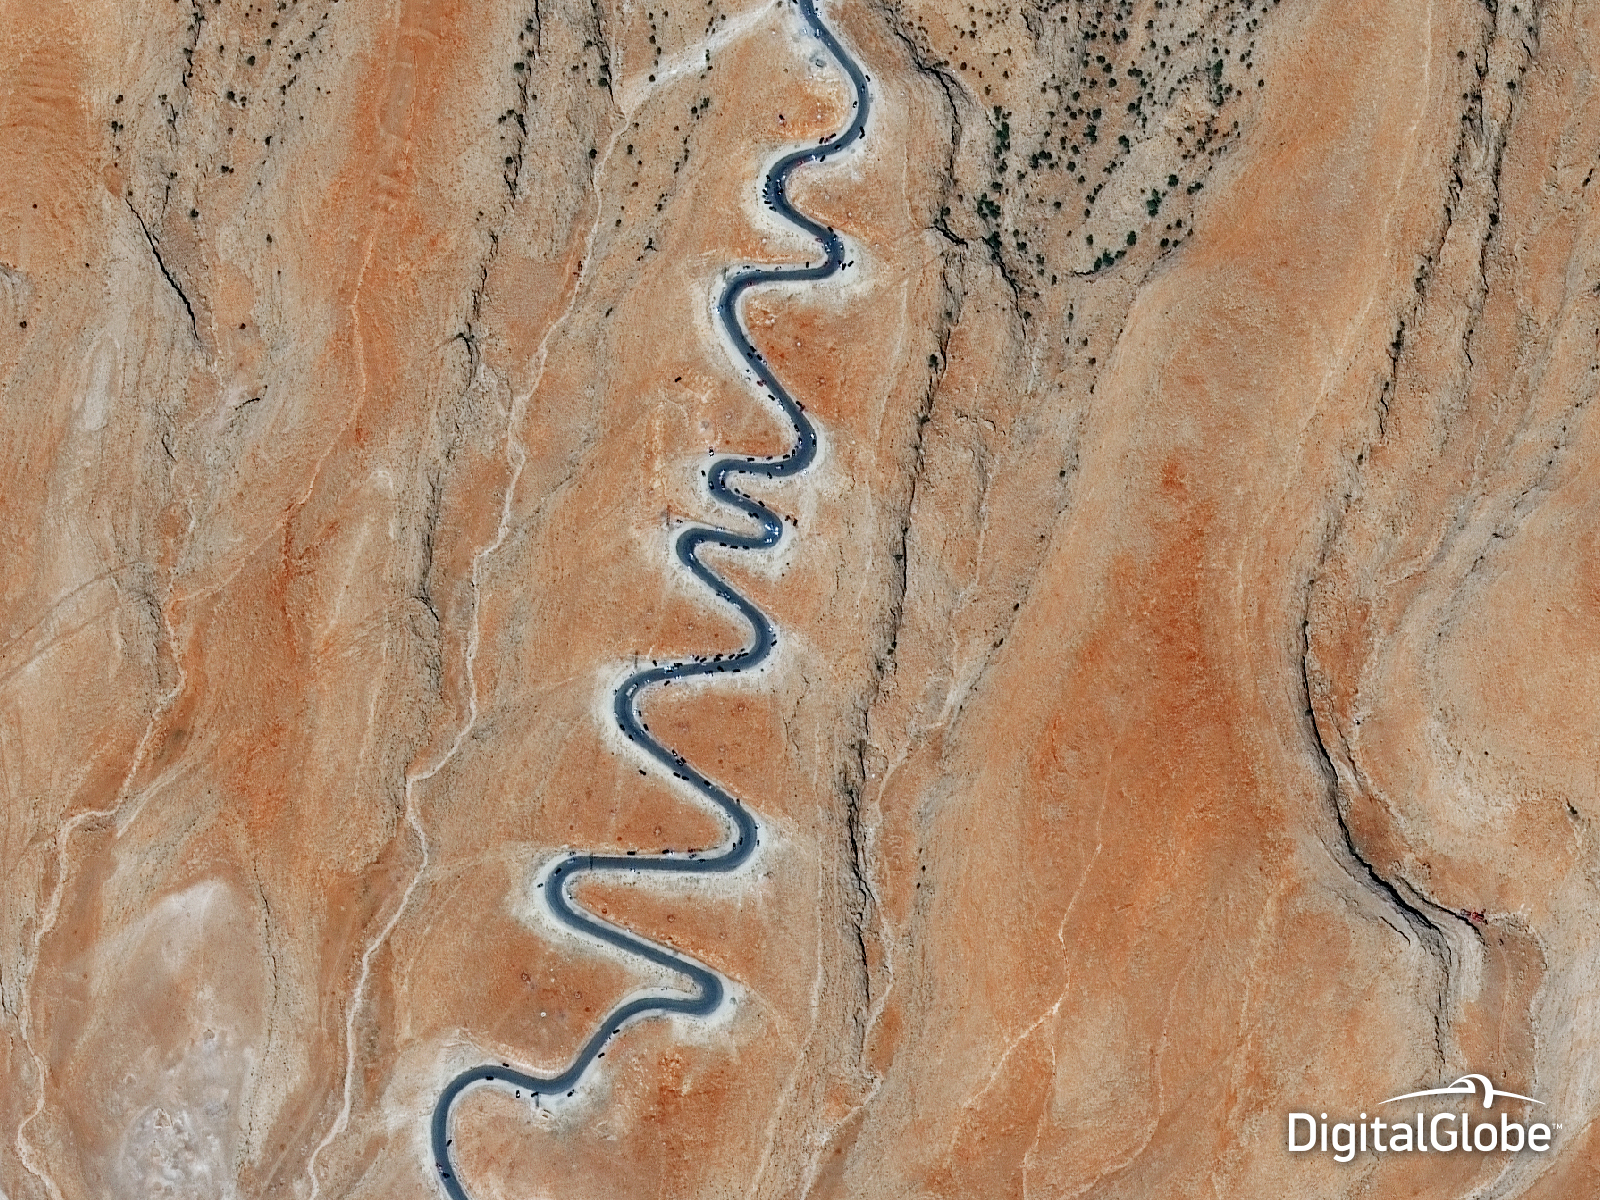 2014 As Told By Photos From The World’s Highest Resolution Satellites 